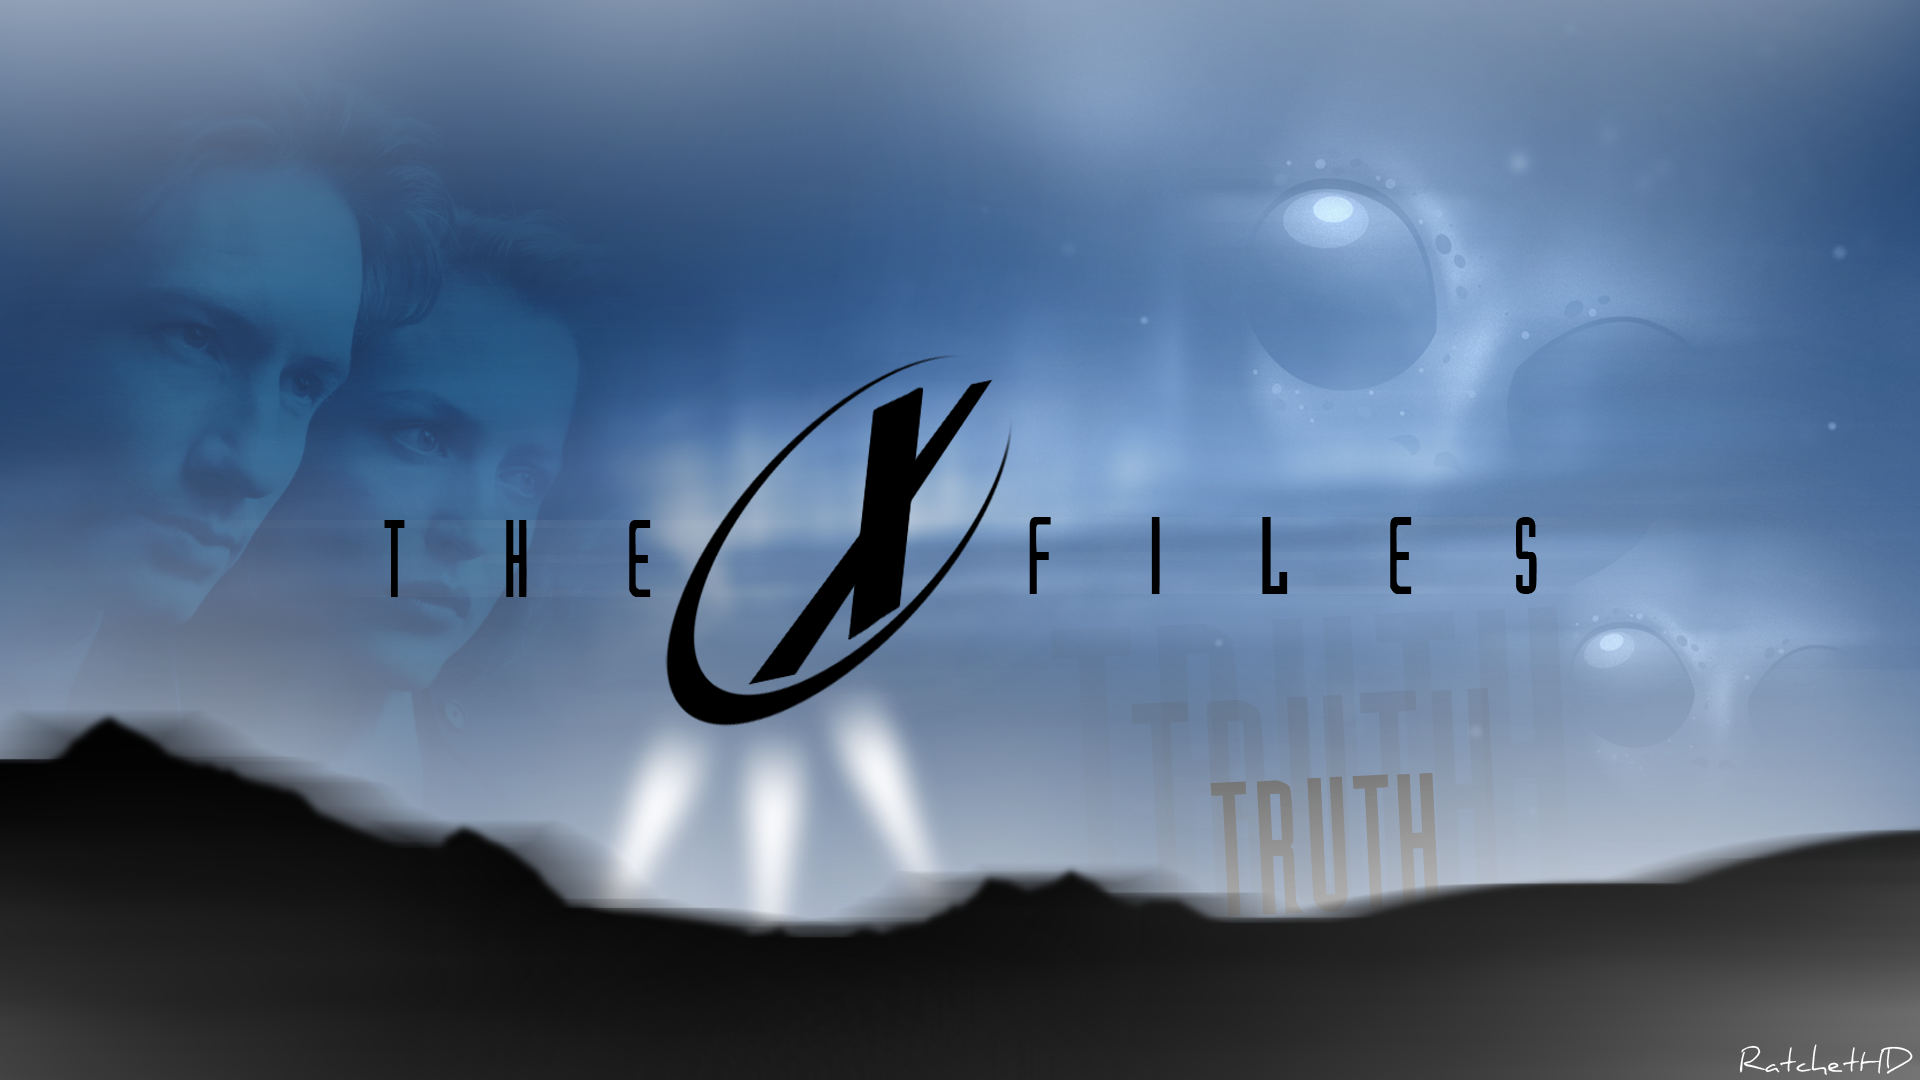 The X Files Wallpapers Wallpaper Cave